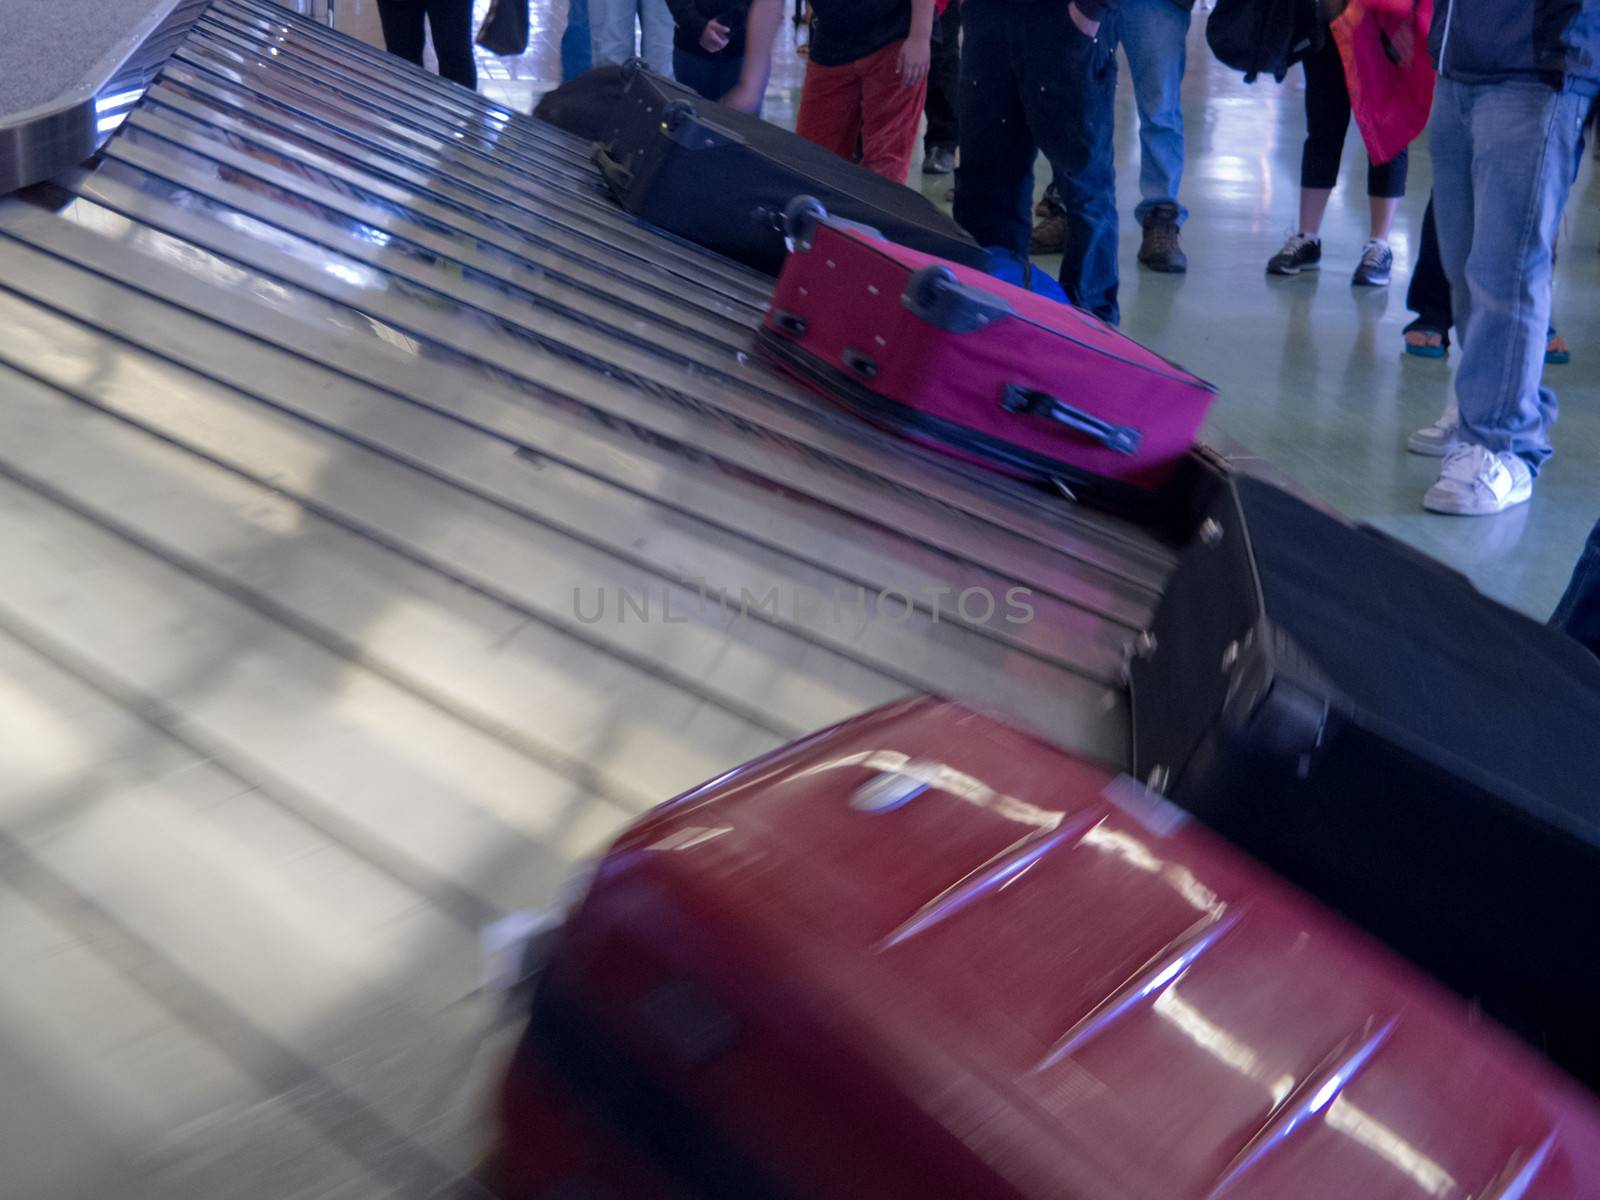 Airport baggage claim, passengers wait for their luggage on conveyor belt after flight landing